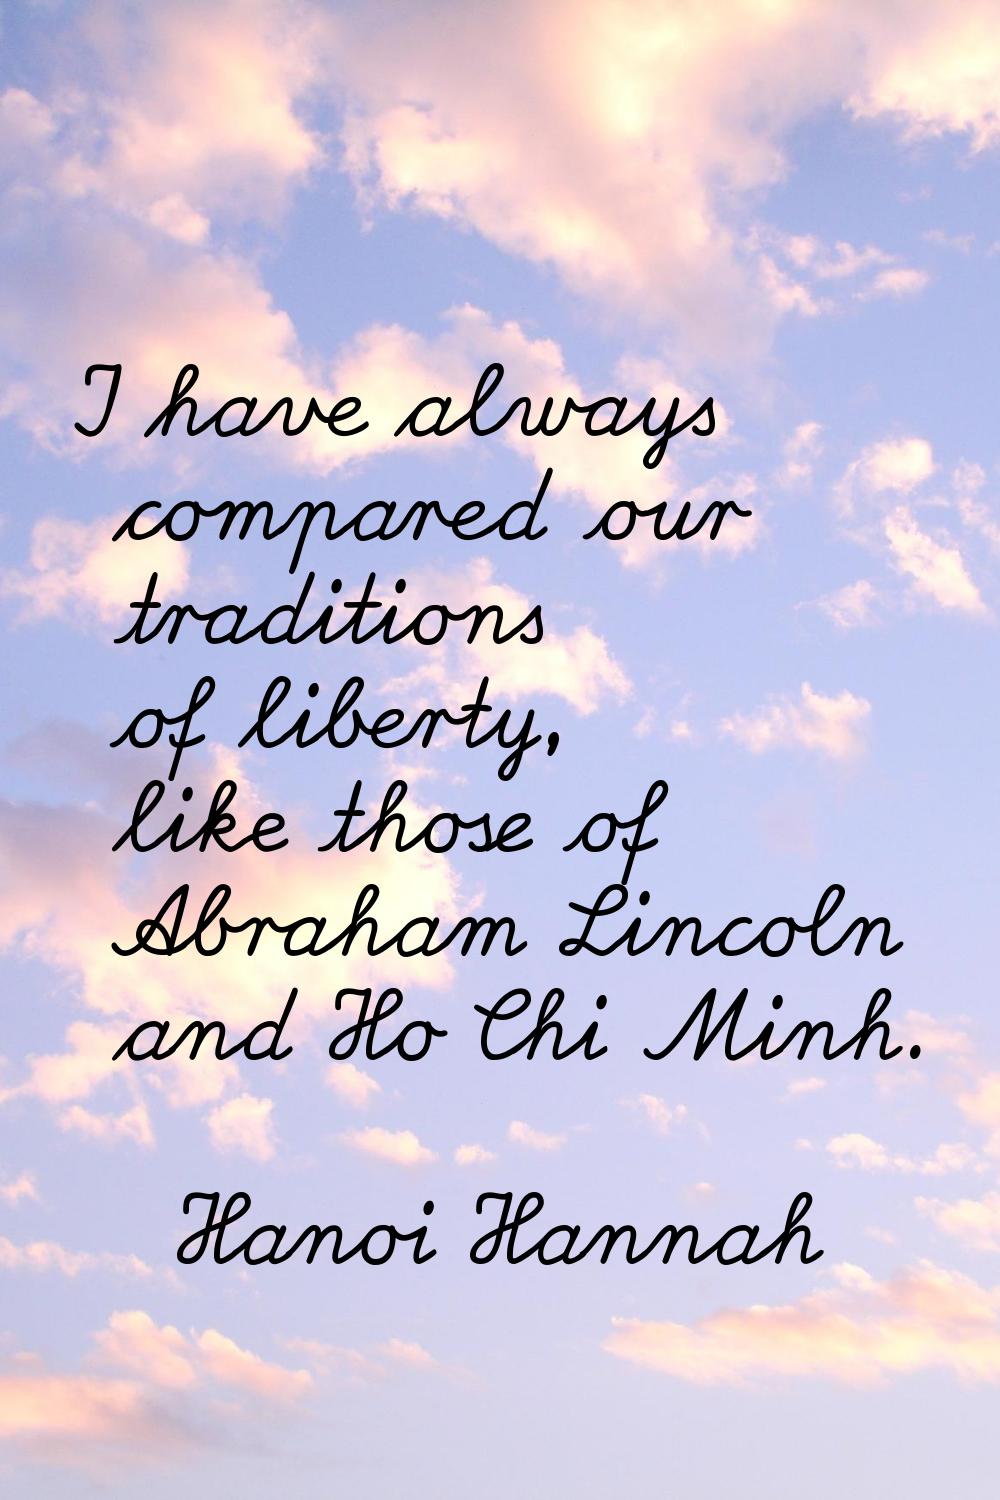 I have always compared our traditions of liberty, like those of Abraham Lincoln and Ho Chi Minh.